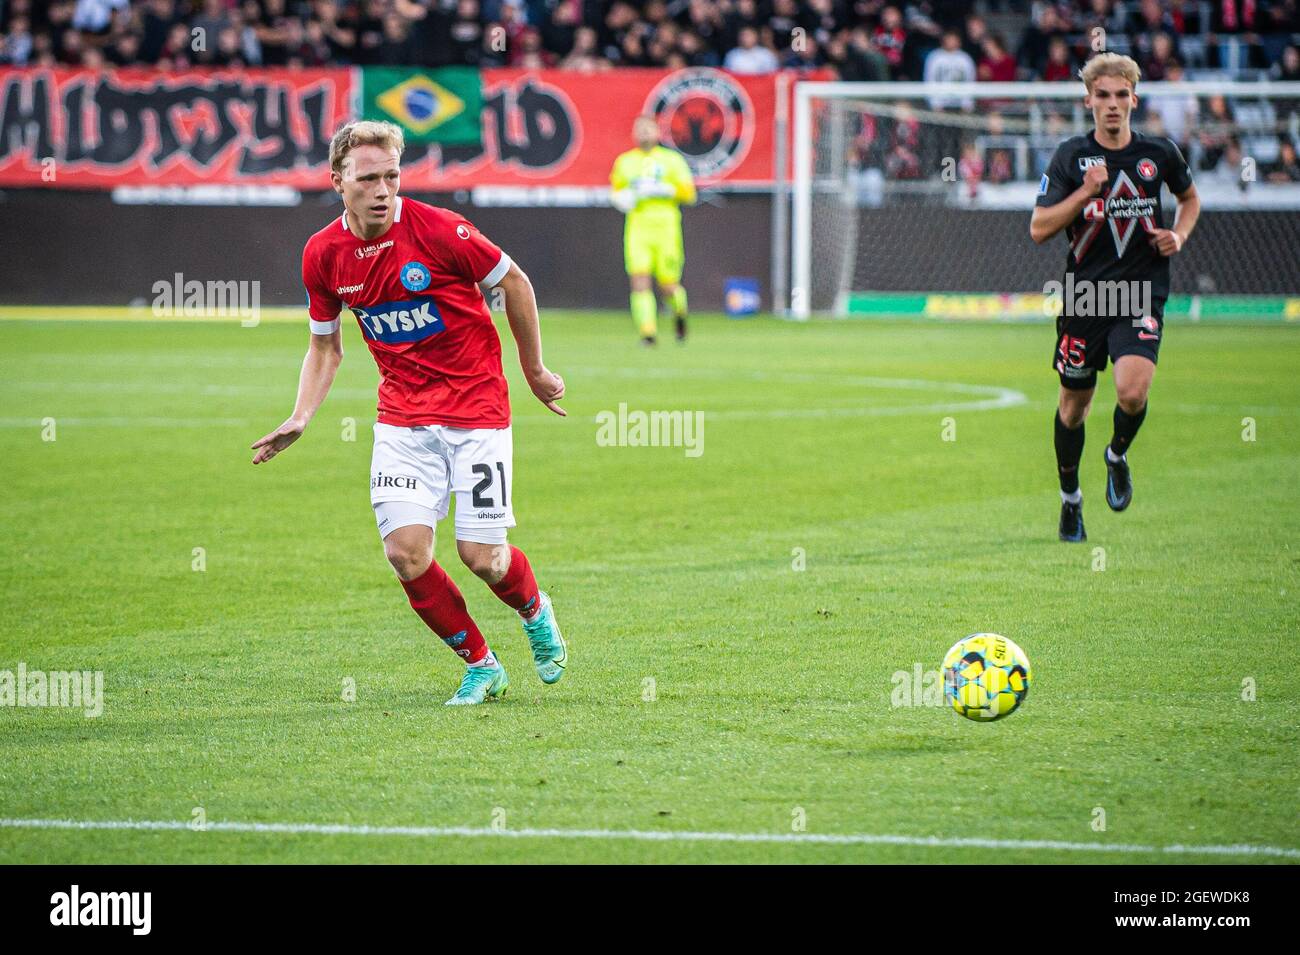 Herning, Denmark. 20th Aug, 2021. Anders Klynge (21) of Silkeborg IF seen during the 3F Superliga match between FC Midtjylland and Silkeborg IF at MCH Arena in Herning. (Photo Credit: Gonzales Photo/Alamy Live News Stock Photo